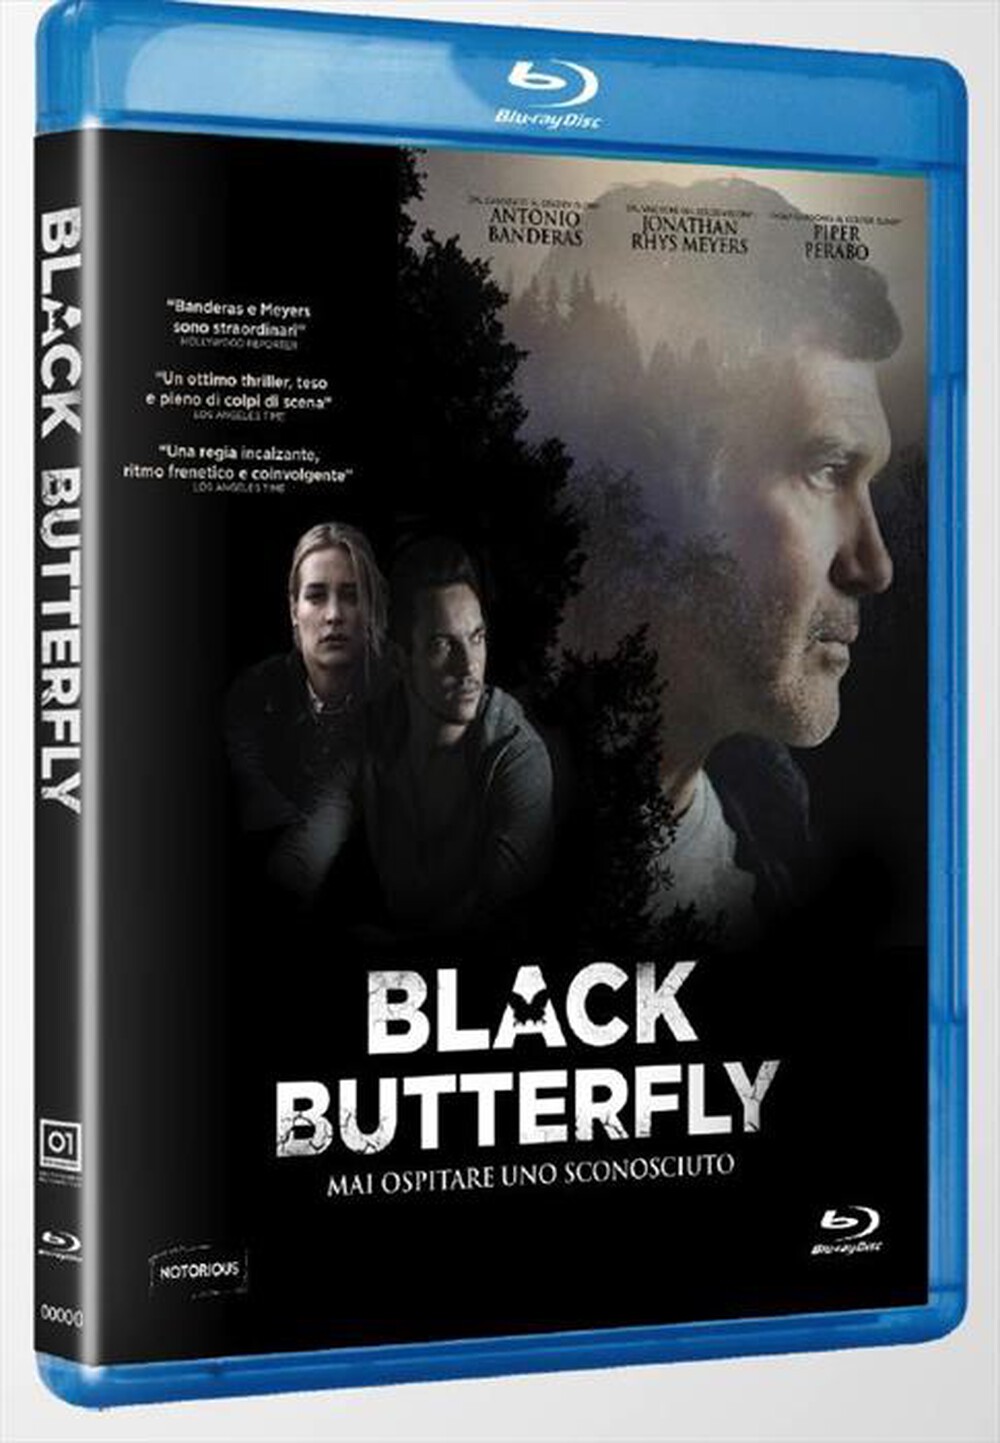 "EAGLE PICTURES - Black Butterfly"